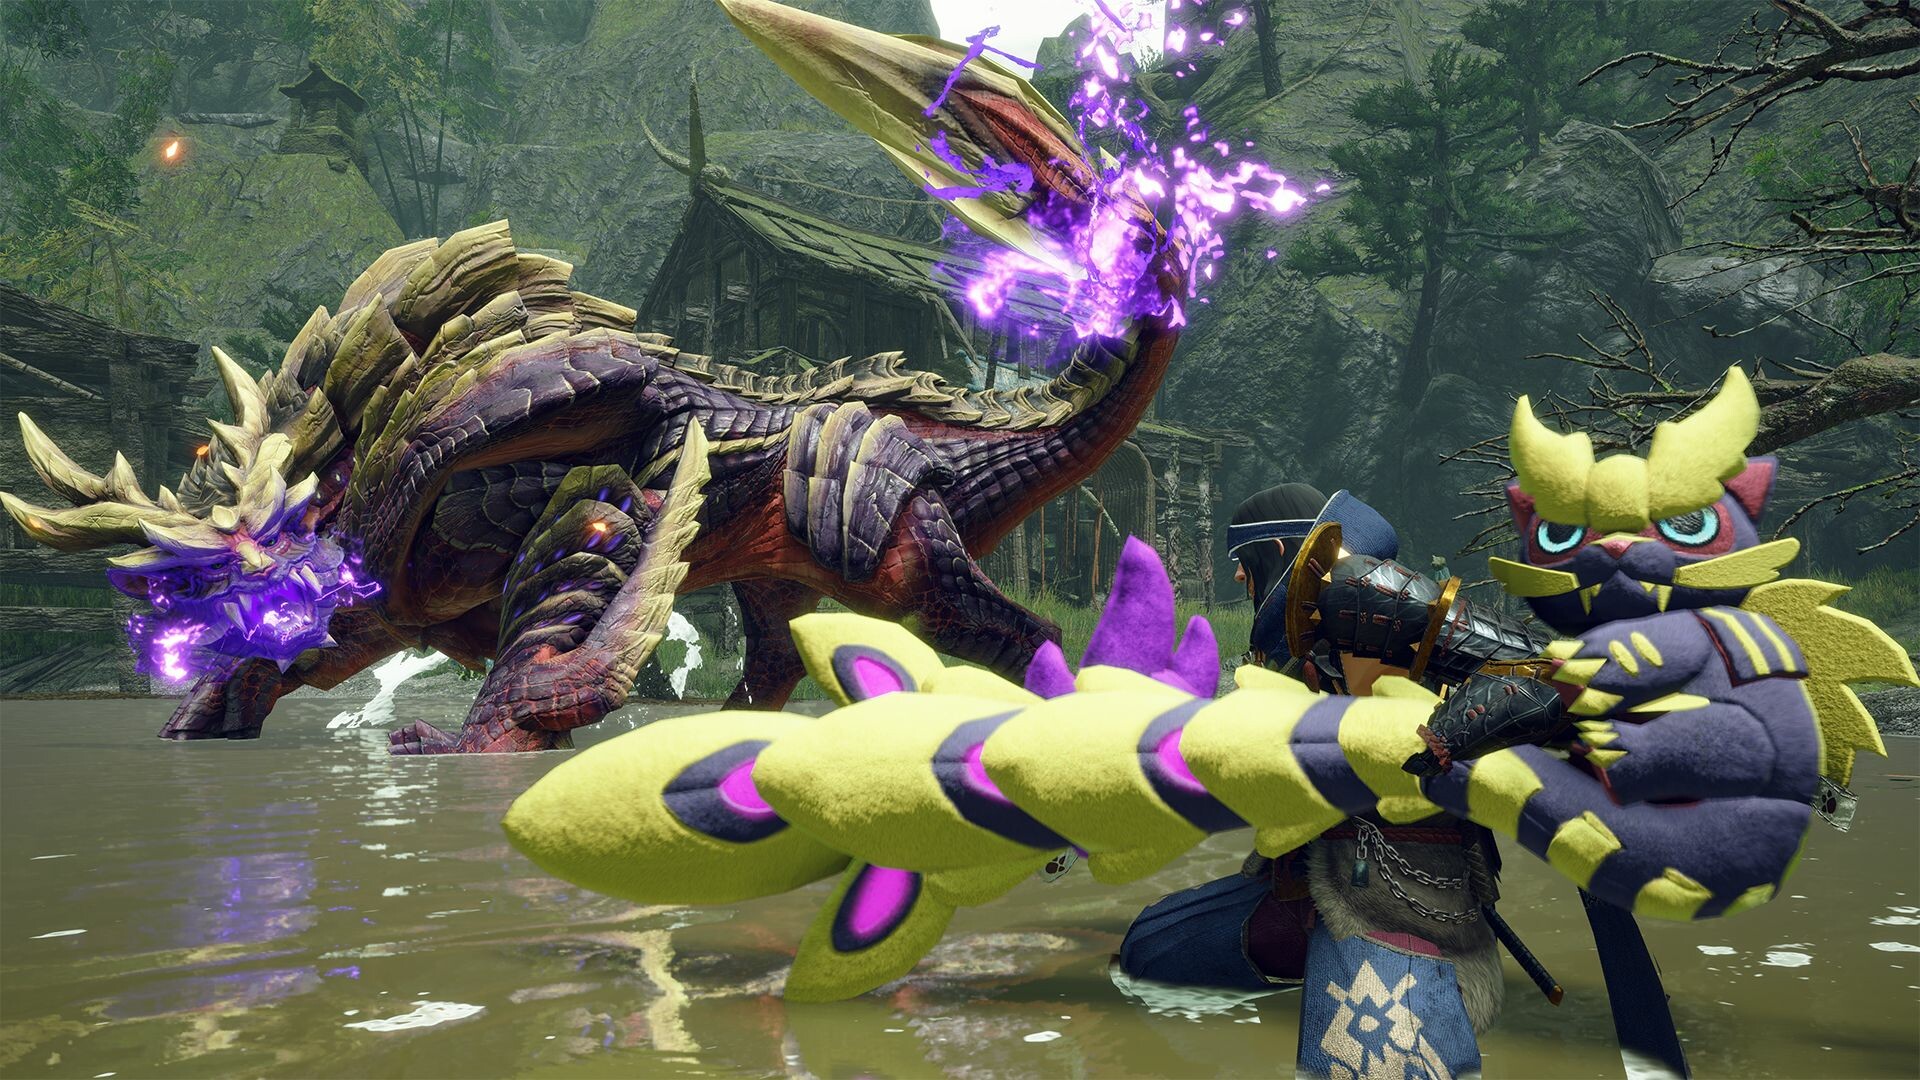 Save 25% on Monster Hunter Rise - Stuffed Diablos Hunter layered weapon  (Hammer) on Steam